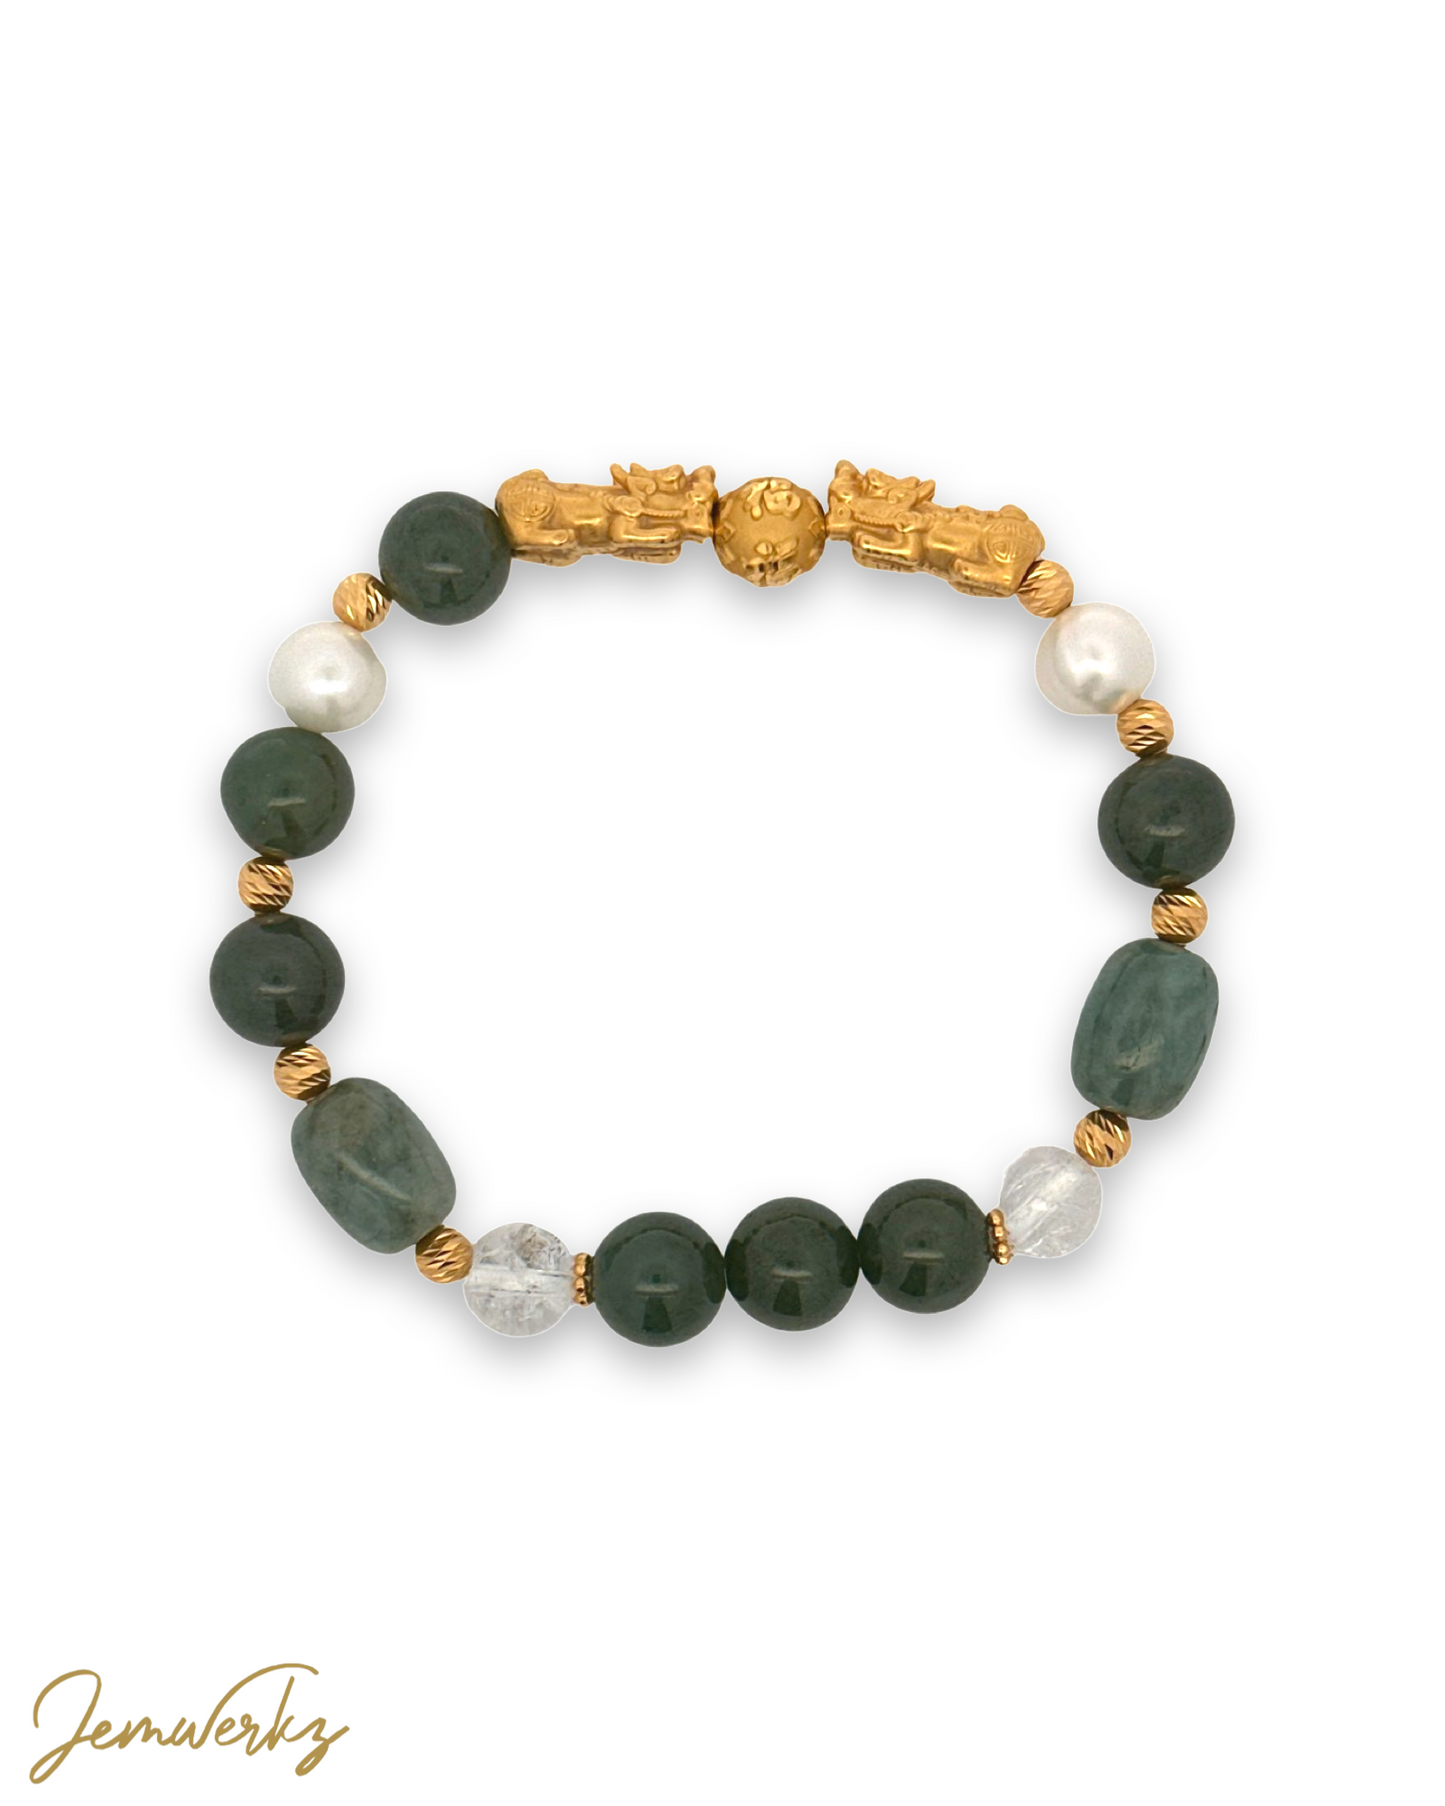 Load image into Gallery viewer, JORDANA GOLD 1.1 - 999 Pure Gold Pixiu with Jade Barrels, Jade, Crackled Clear Quartz, Freshwater Pearls and 916 Gold Spacers Bracelet
